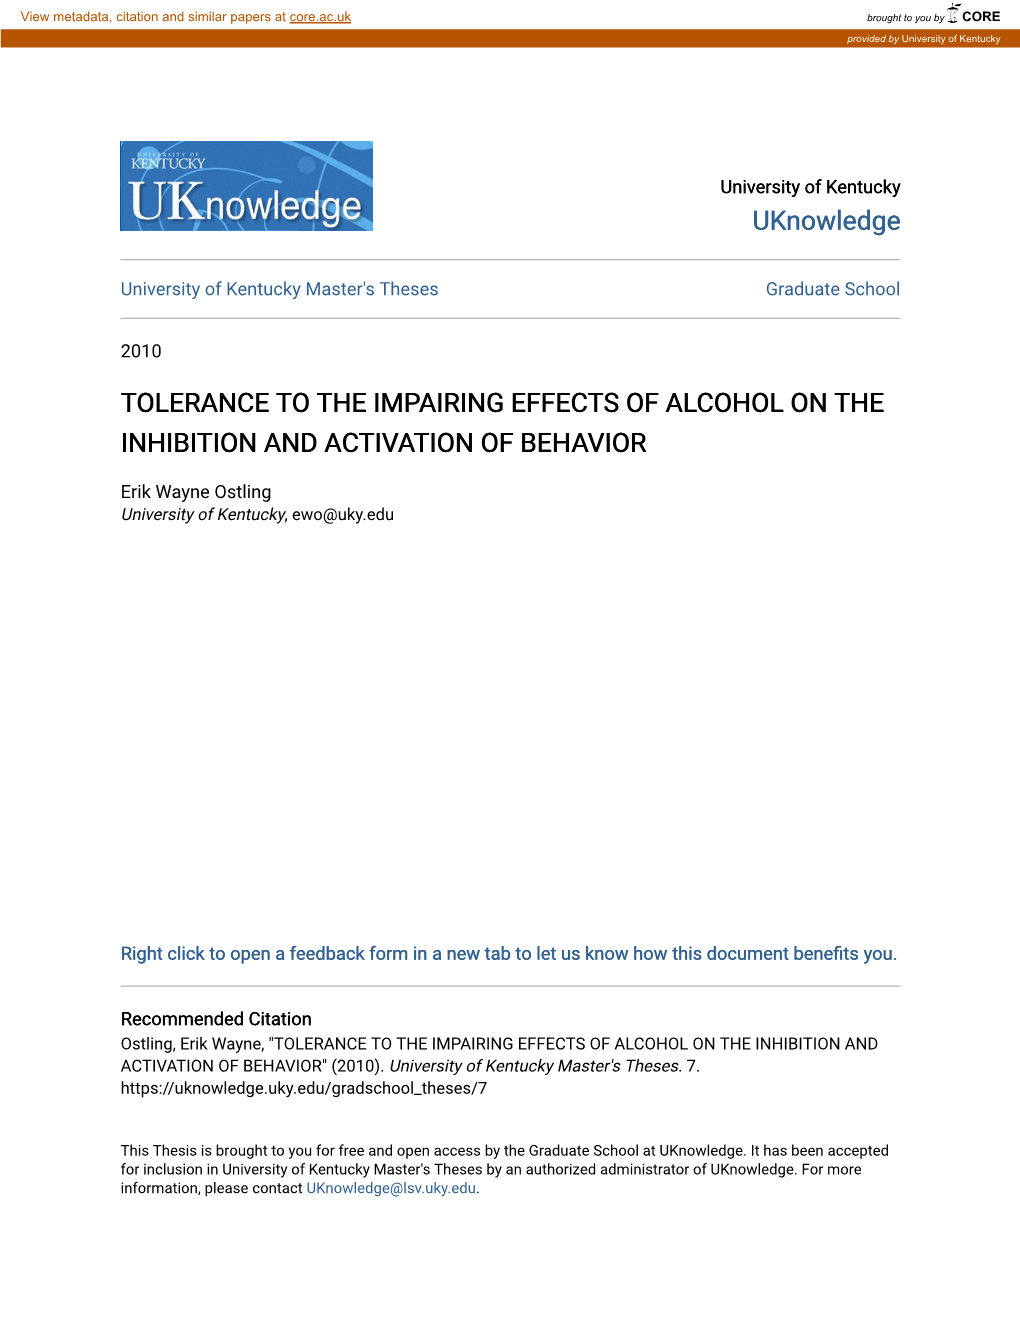 Tolerance to the Impairing Effects of Alcohol on the Inhibition and Activation of Behavior